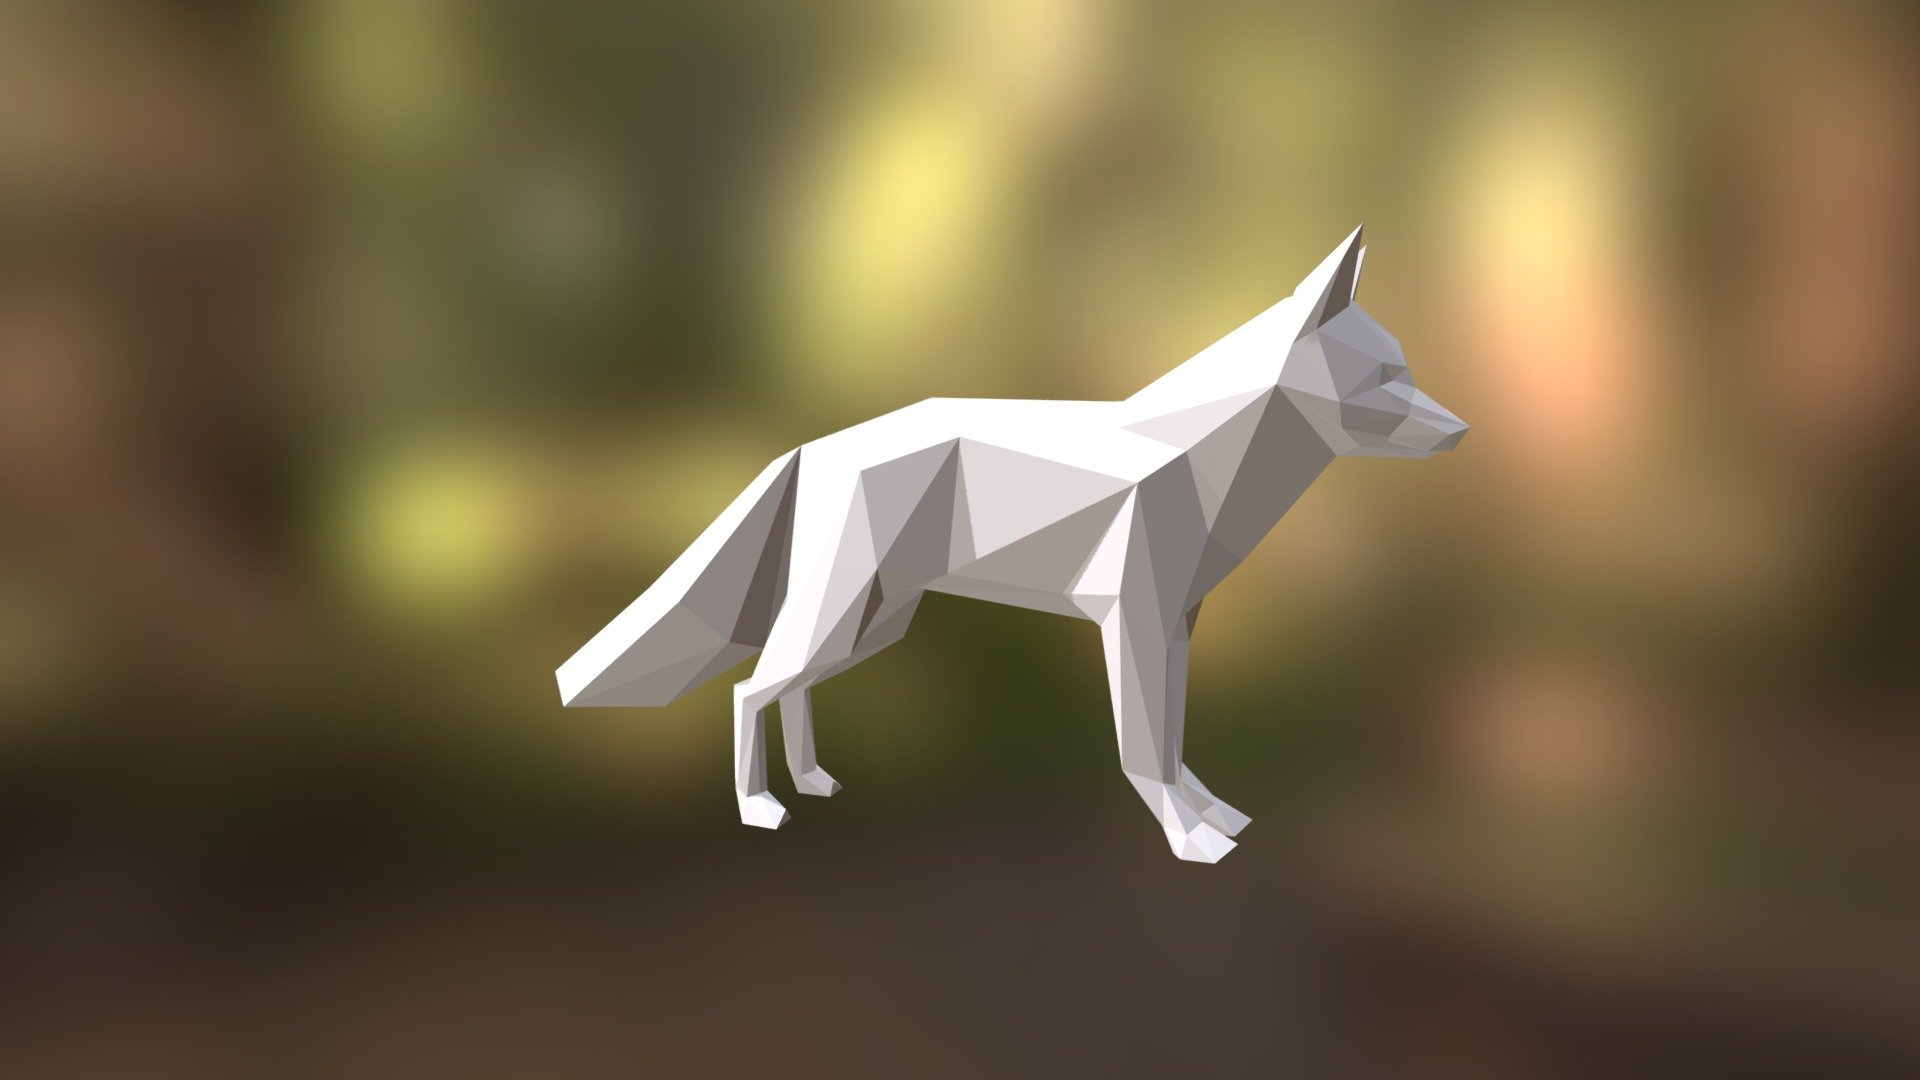 Low Poly 3D model for 3D printing. Fox Low Poly sculpture. You can find this model for 3D printing in my shop: -link removed- Reference model: http://www.cadnav.com - Fox low poly model for 3D printing - 3D model by Peolla3D 3d model